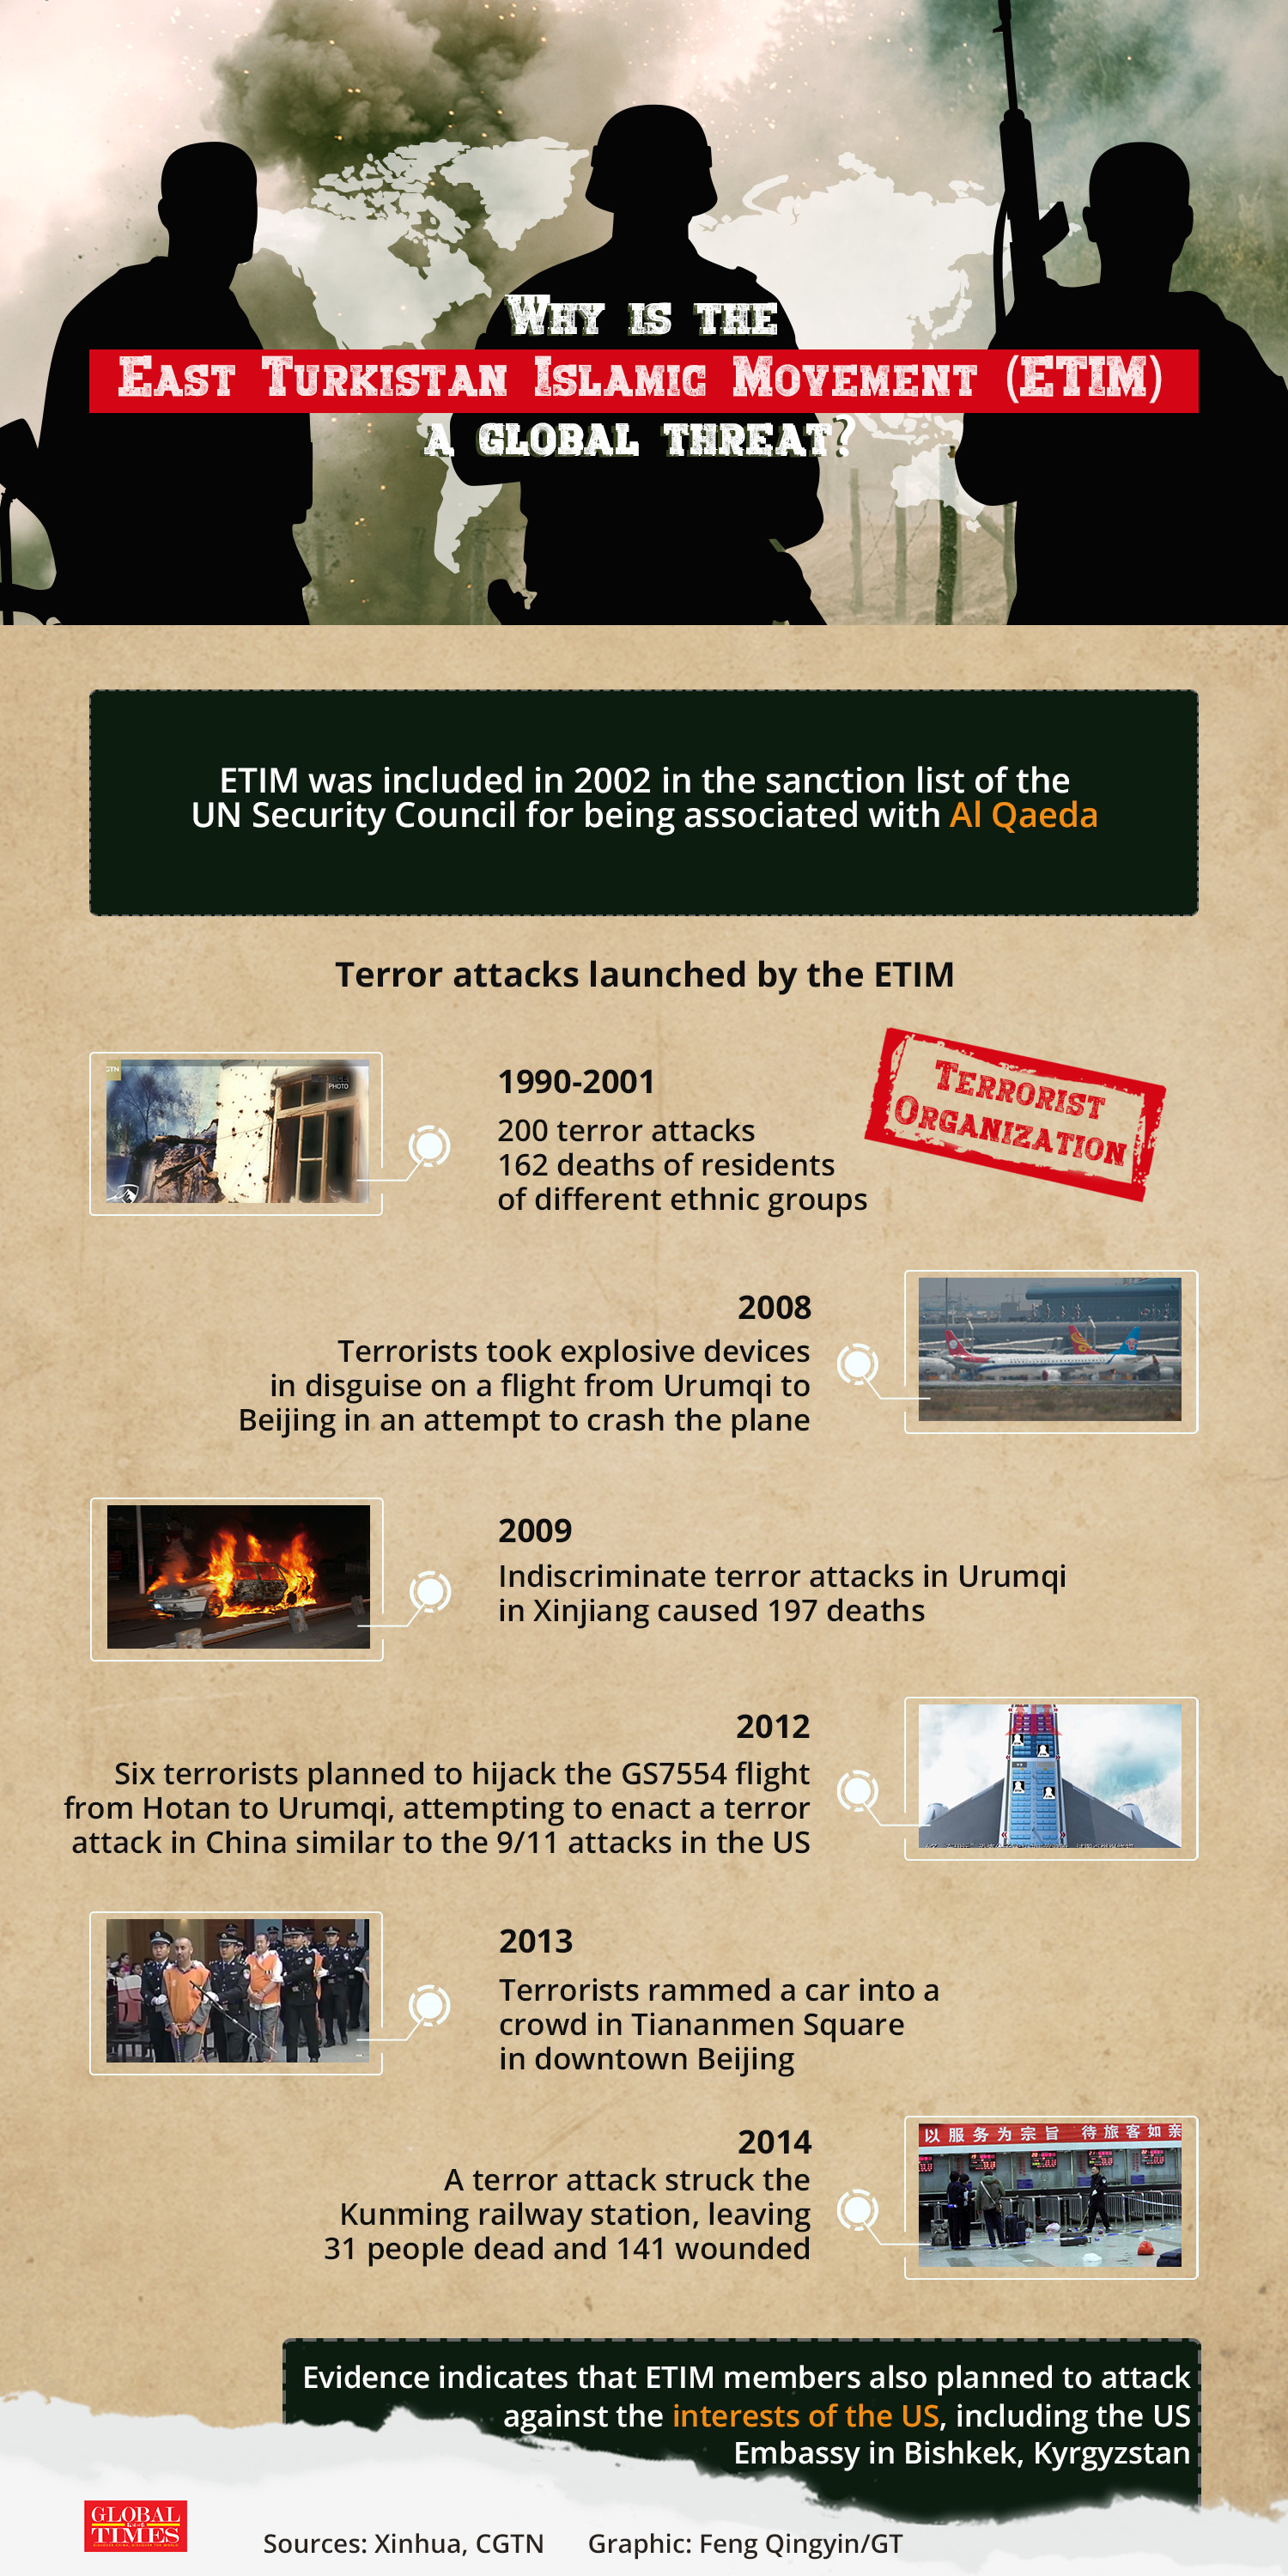 Besides inciting violence and organizing terror attacks in China’s Xinjiang, the ETIM, a terrorist organization on the UN security sanction list over ties with Al Qaeda, also planned attacks on the US Embassy in Bishkek, Kyrgyzstan, posing a threat to all. Graphic: Feng Qingyin/GT